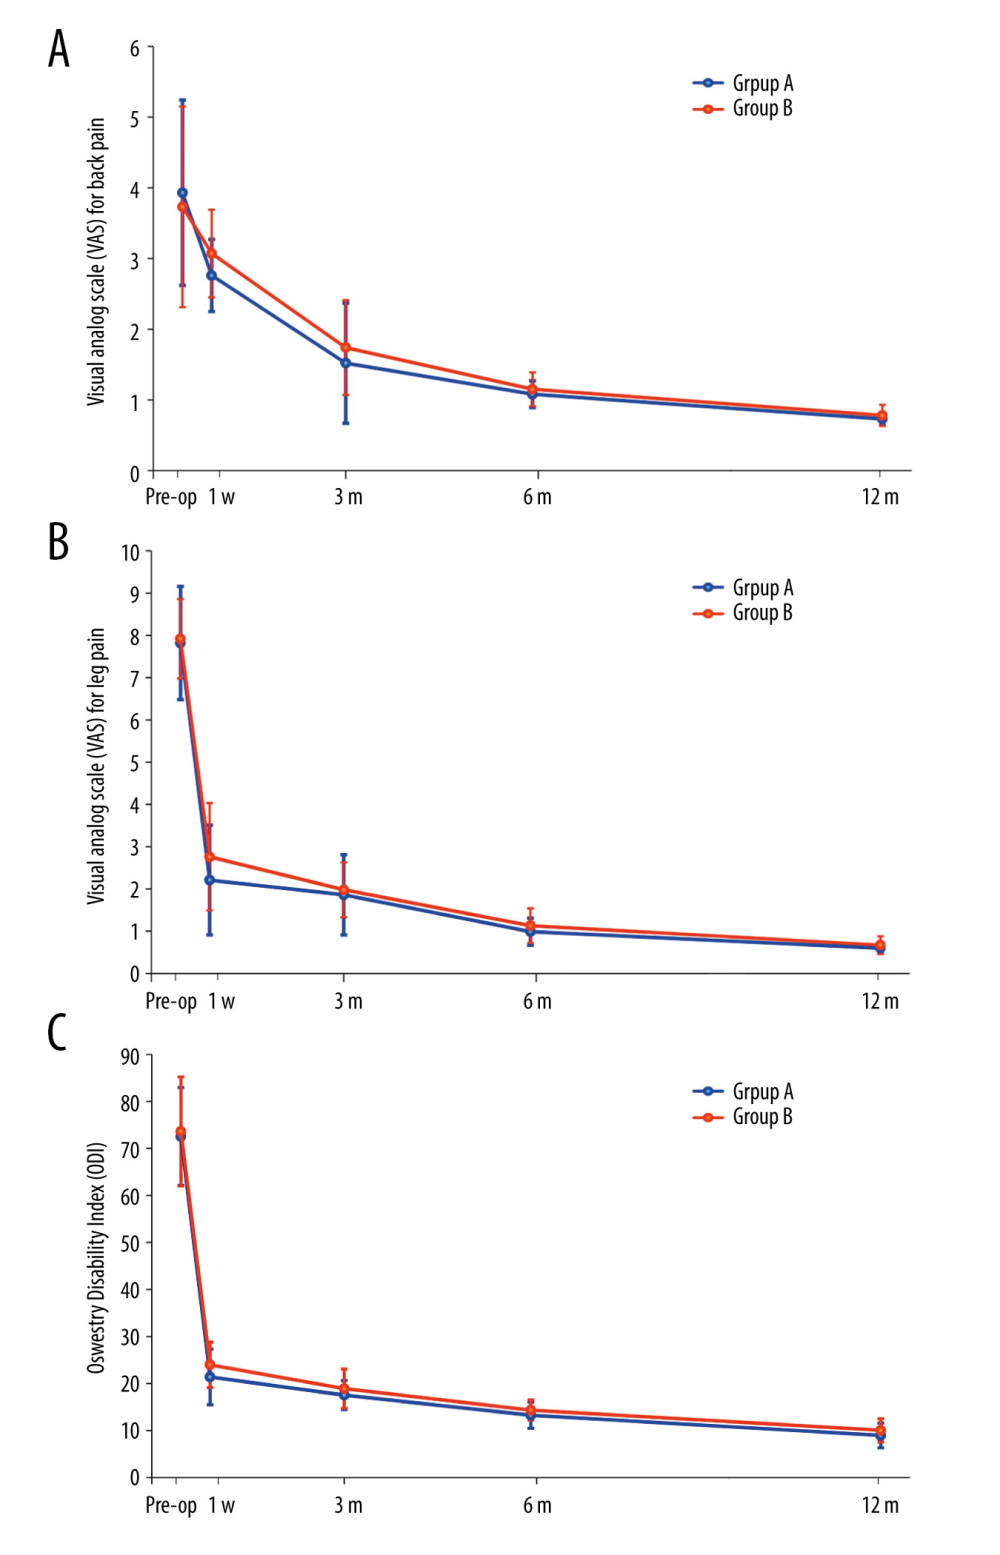 Clinical outcomes before and after decompression at different follow-up time points in groups A and B. (A) Visual analog scale (VAS) scores for back pain. (B) VAS scores for leg pain. (C) Oswestry Disability Index (ODI). Group A, iLESSYS® Delta systemiLESSYS® Delta system; group B, bilateral laminotomy. Pre-op – preoperative; 1 w – postoperative 1 week; 3 m – postoperative 3 months; 6 m – postoperative 6 months; 12 m, postoperative 12 months.